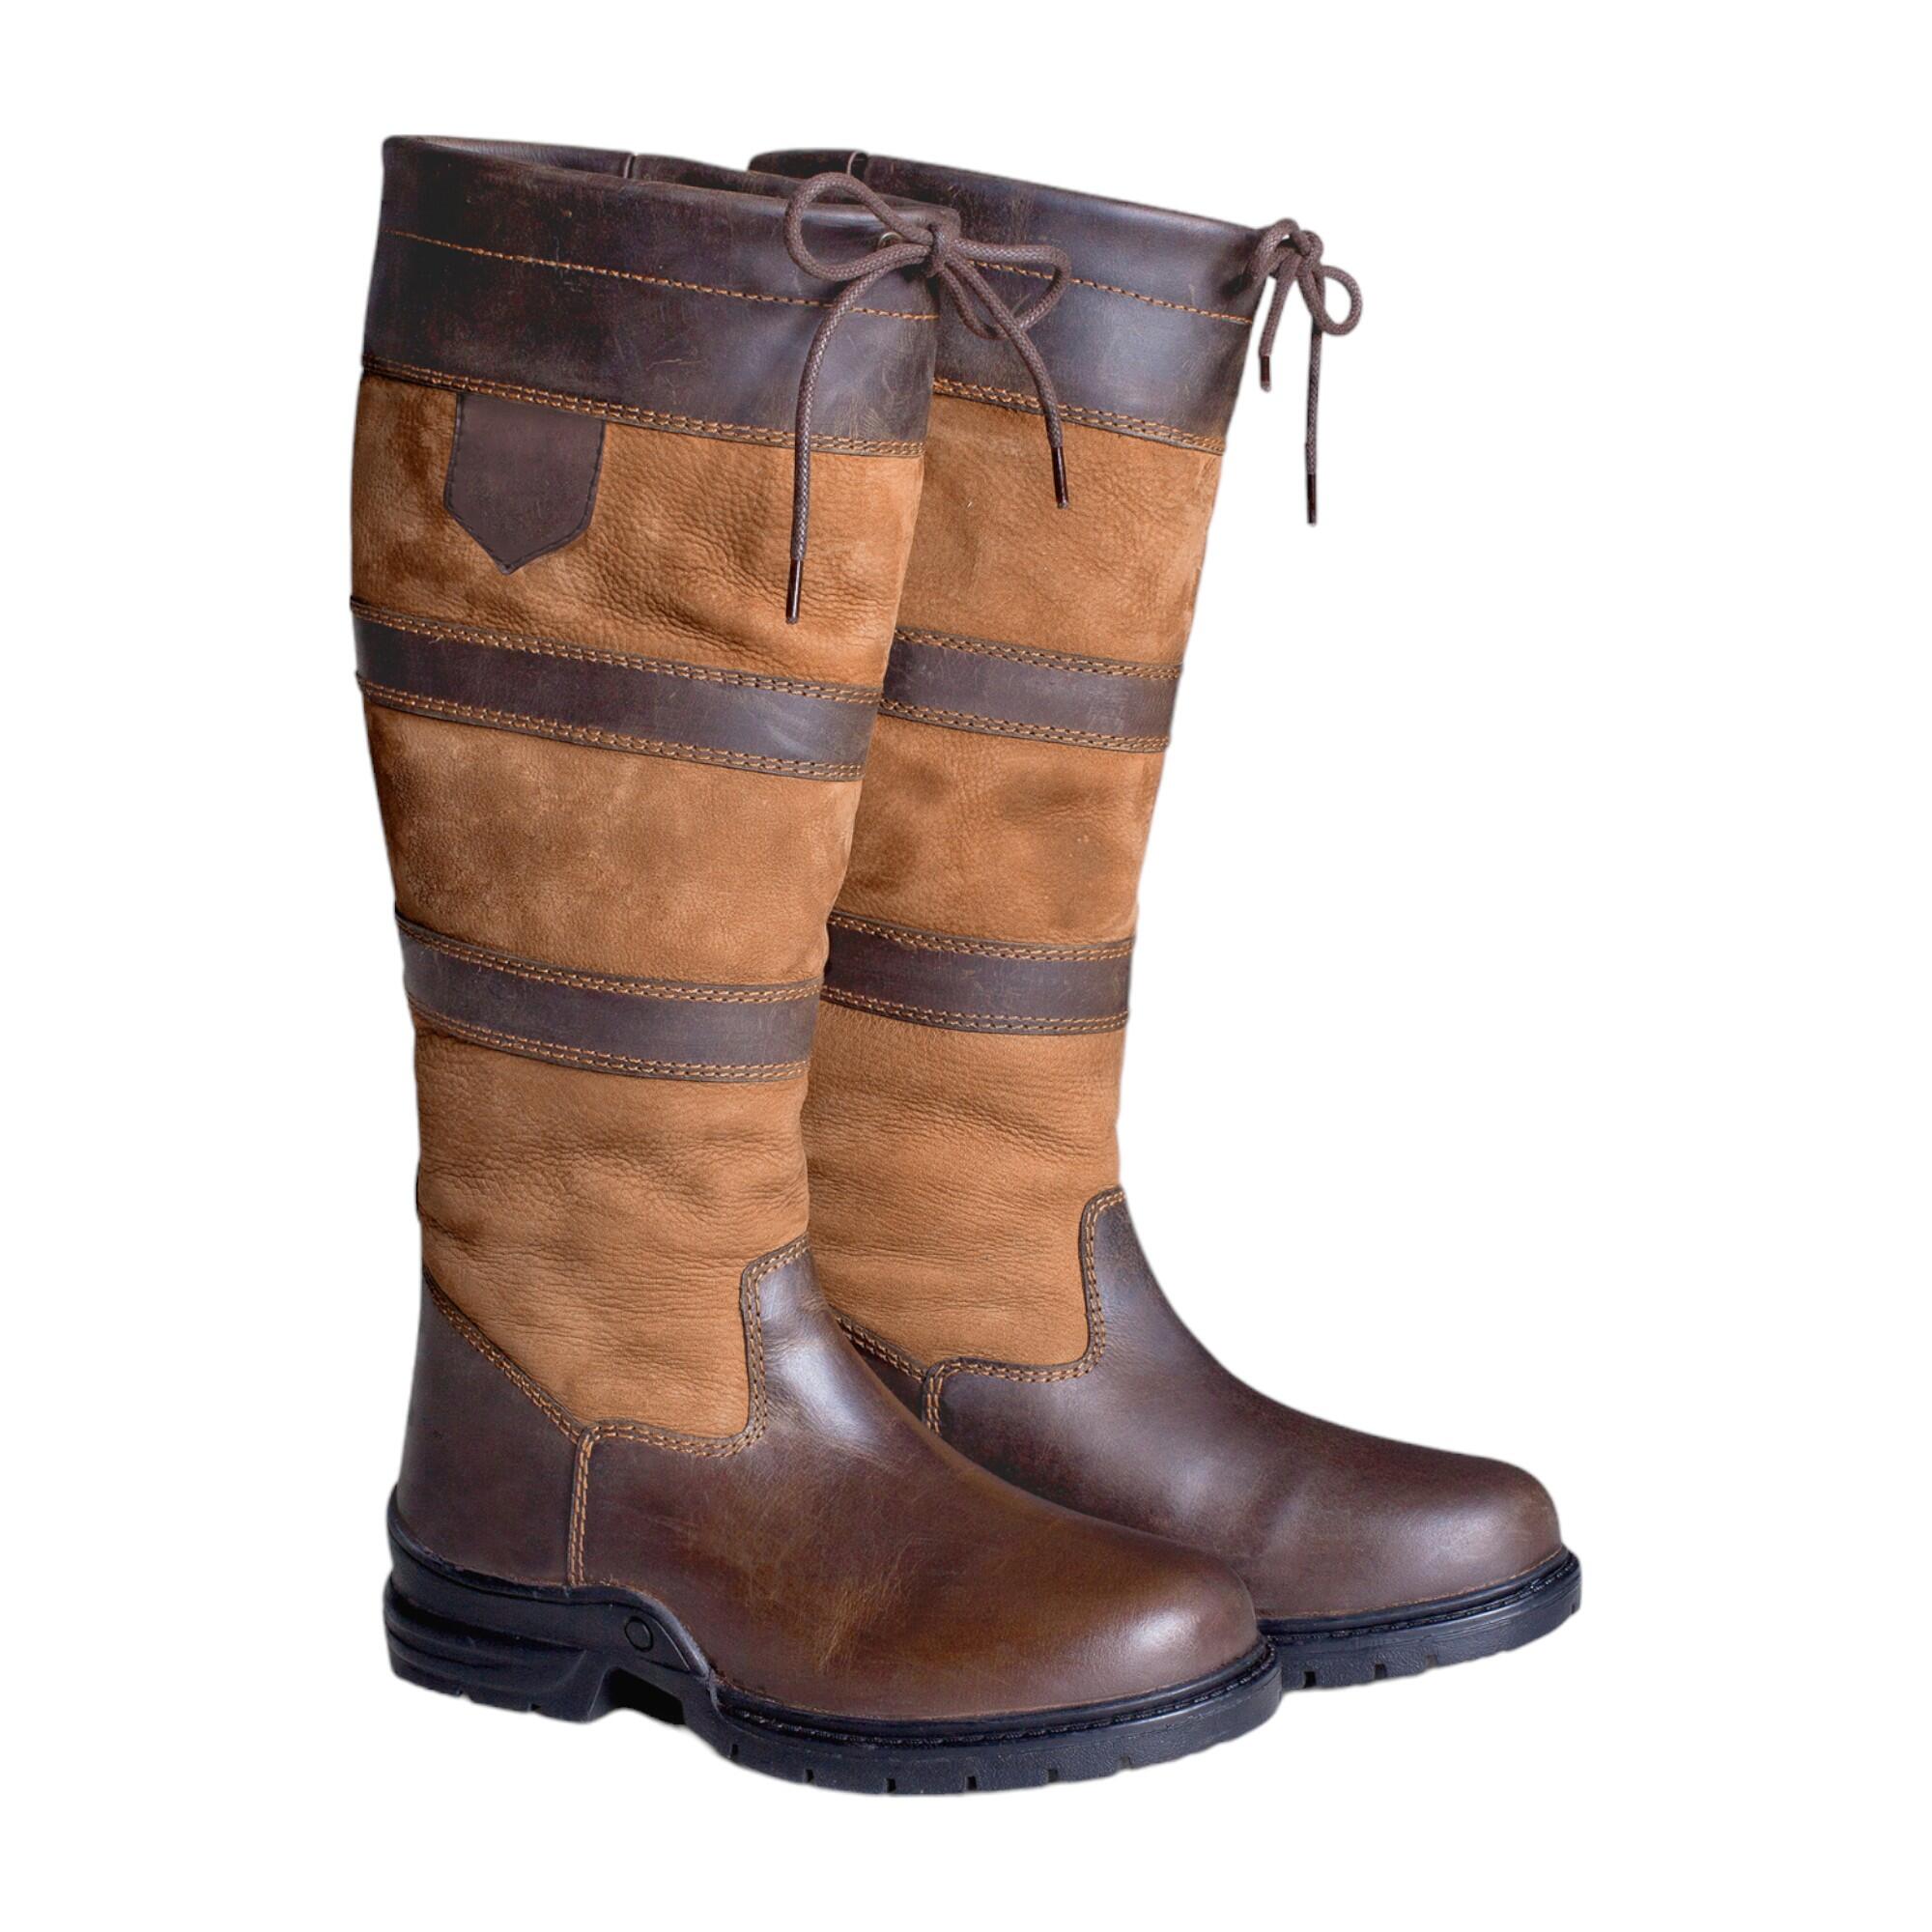 Women's Country Boots